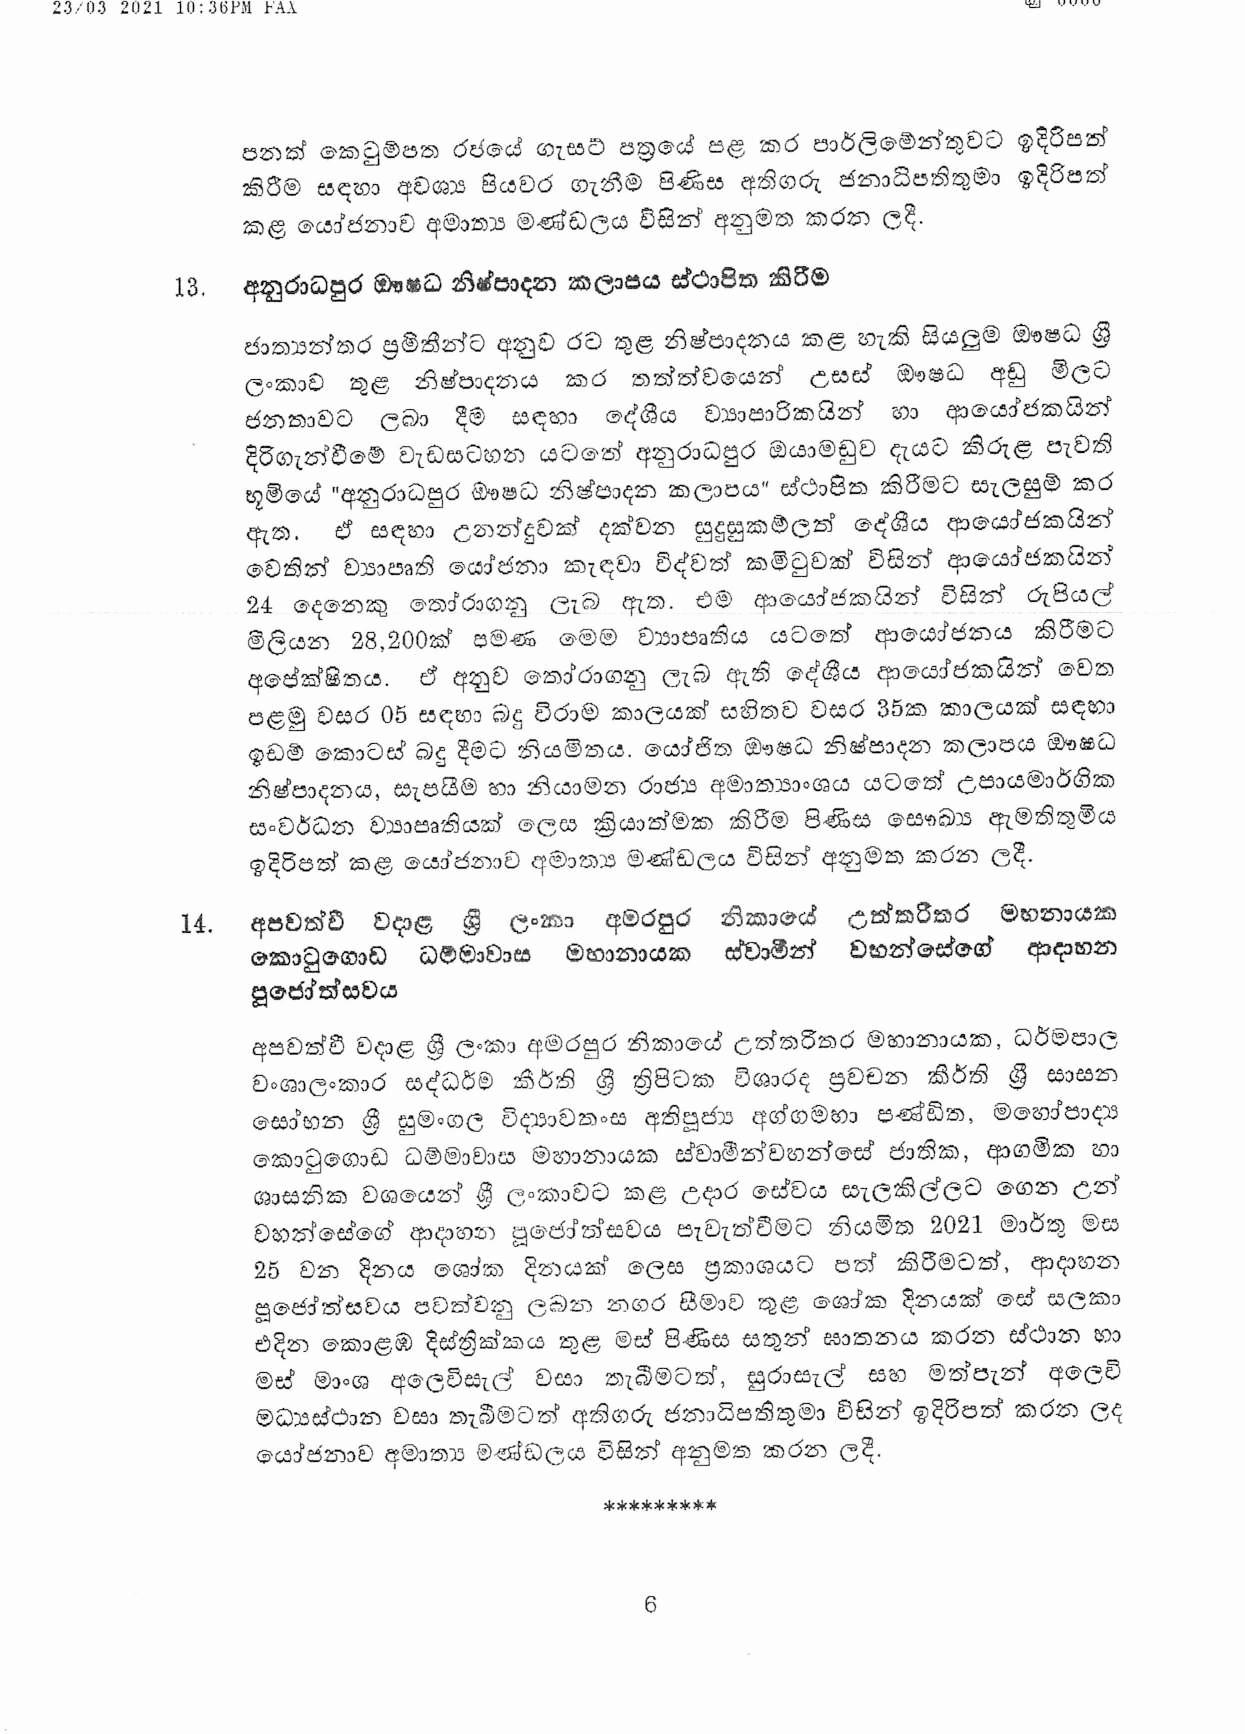 Cabinet Decision on 23.03.2021 Sinhala page 006